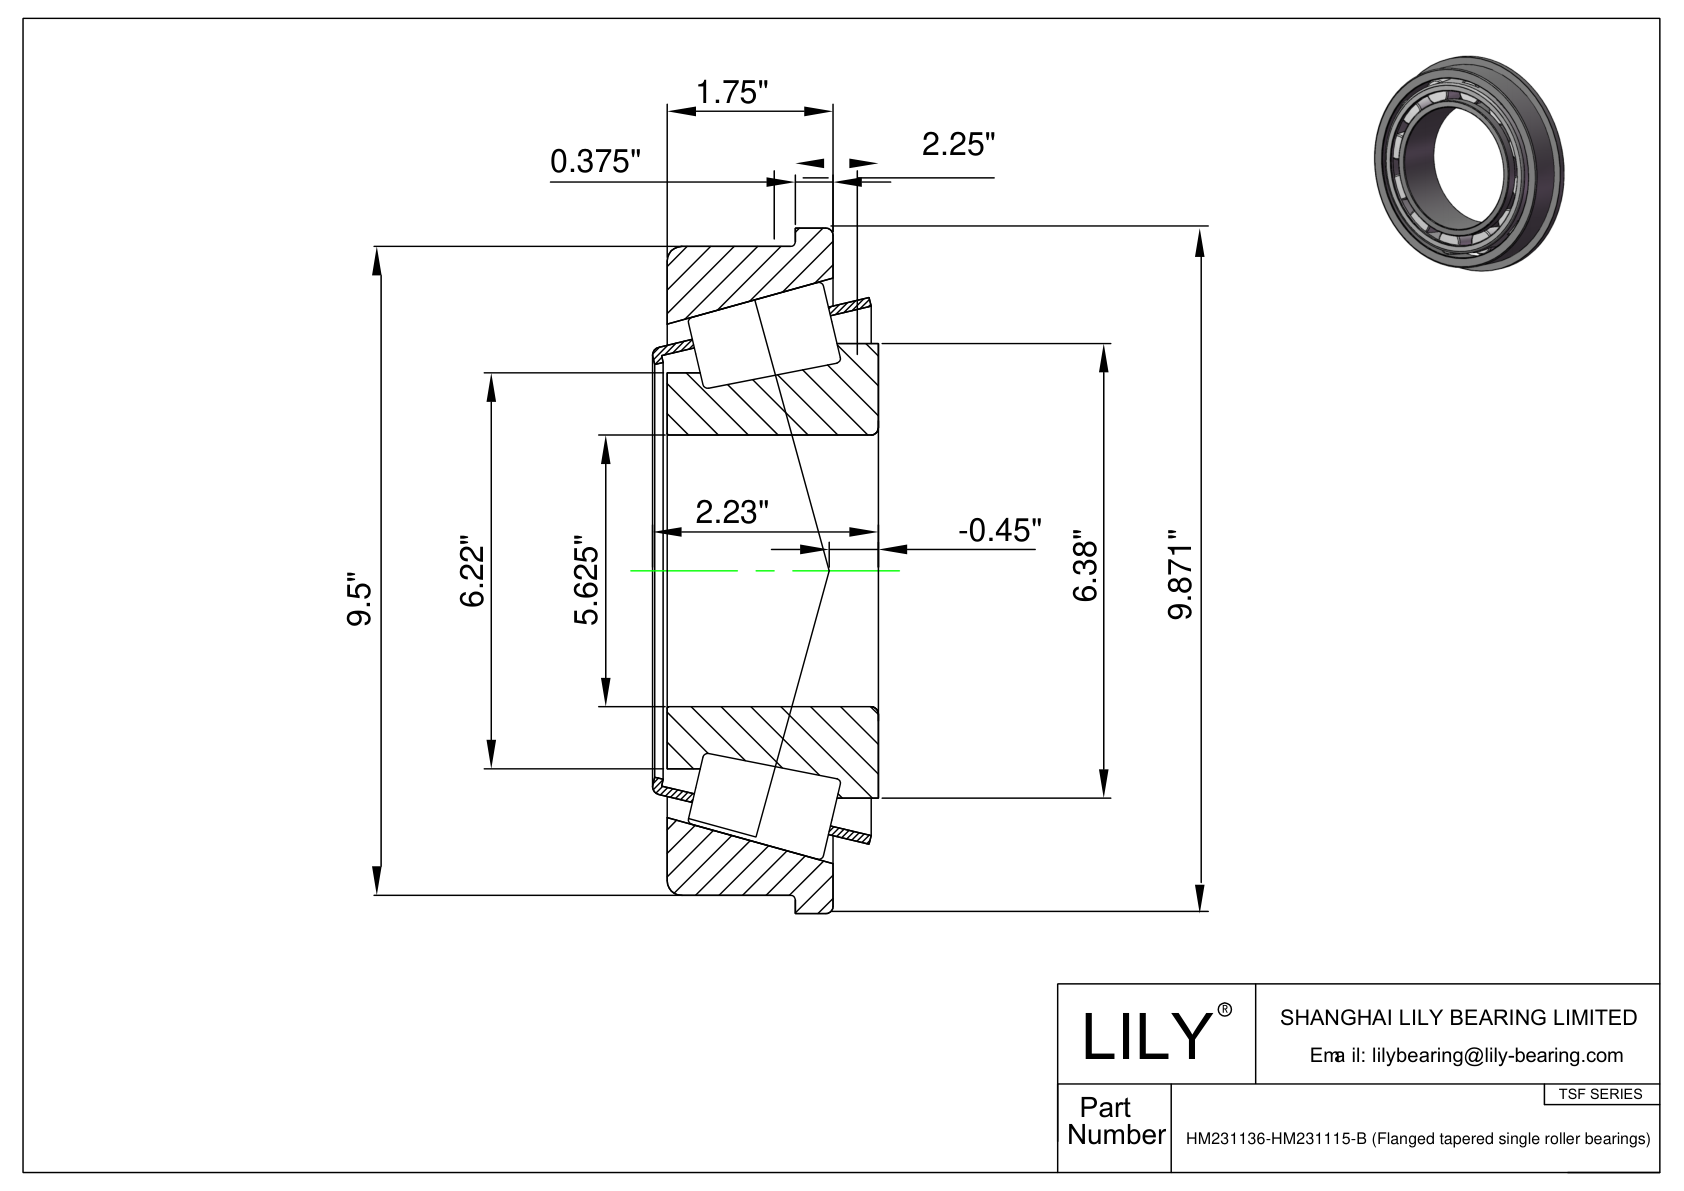 HM231136-HM231115-B TSF (Tapered Single Roller Bearings with Flange) (Imperial) cad drawing